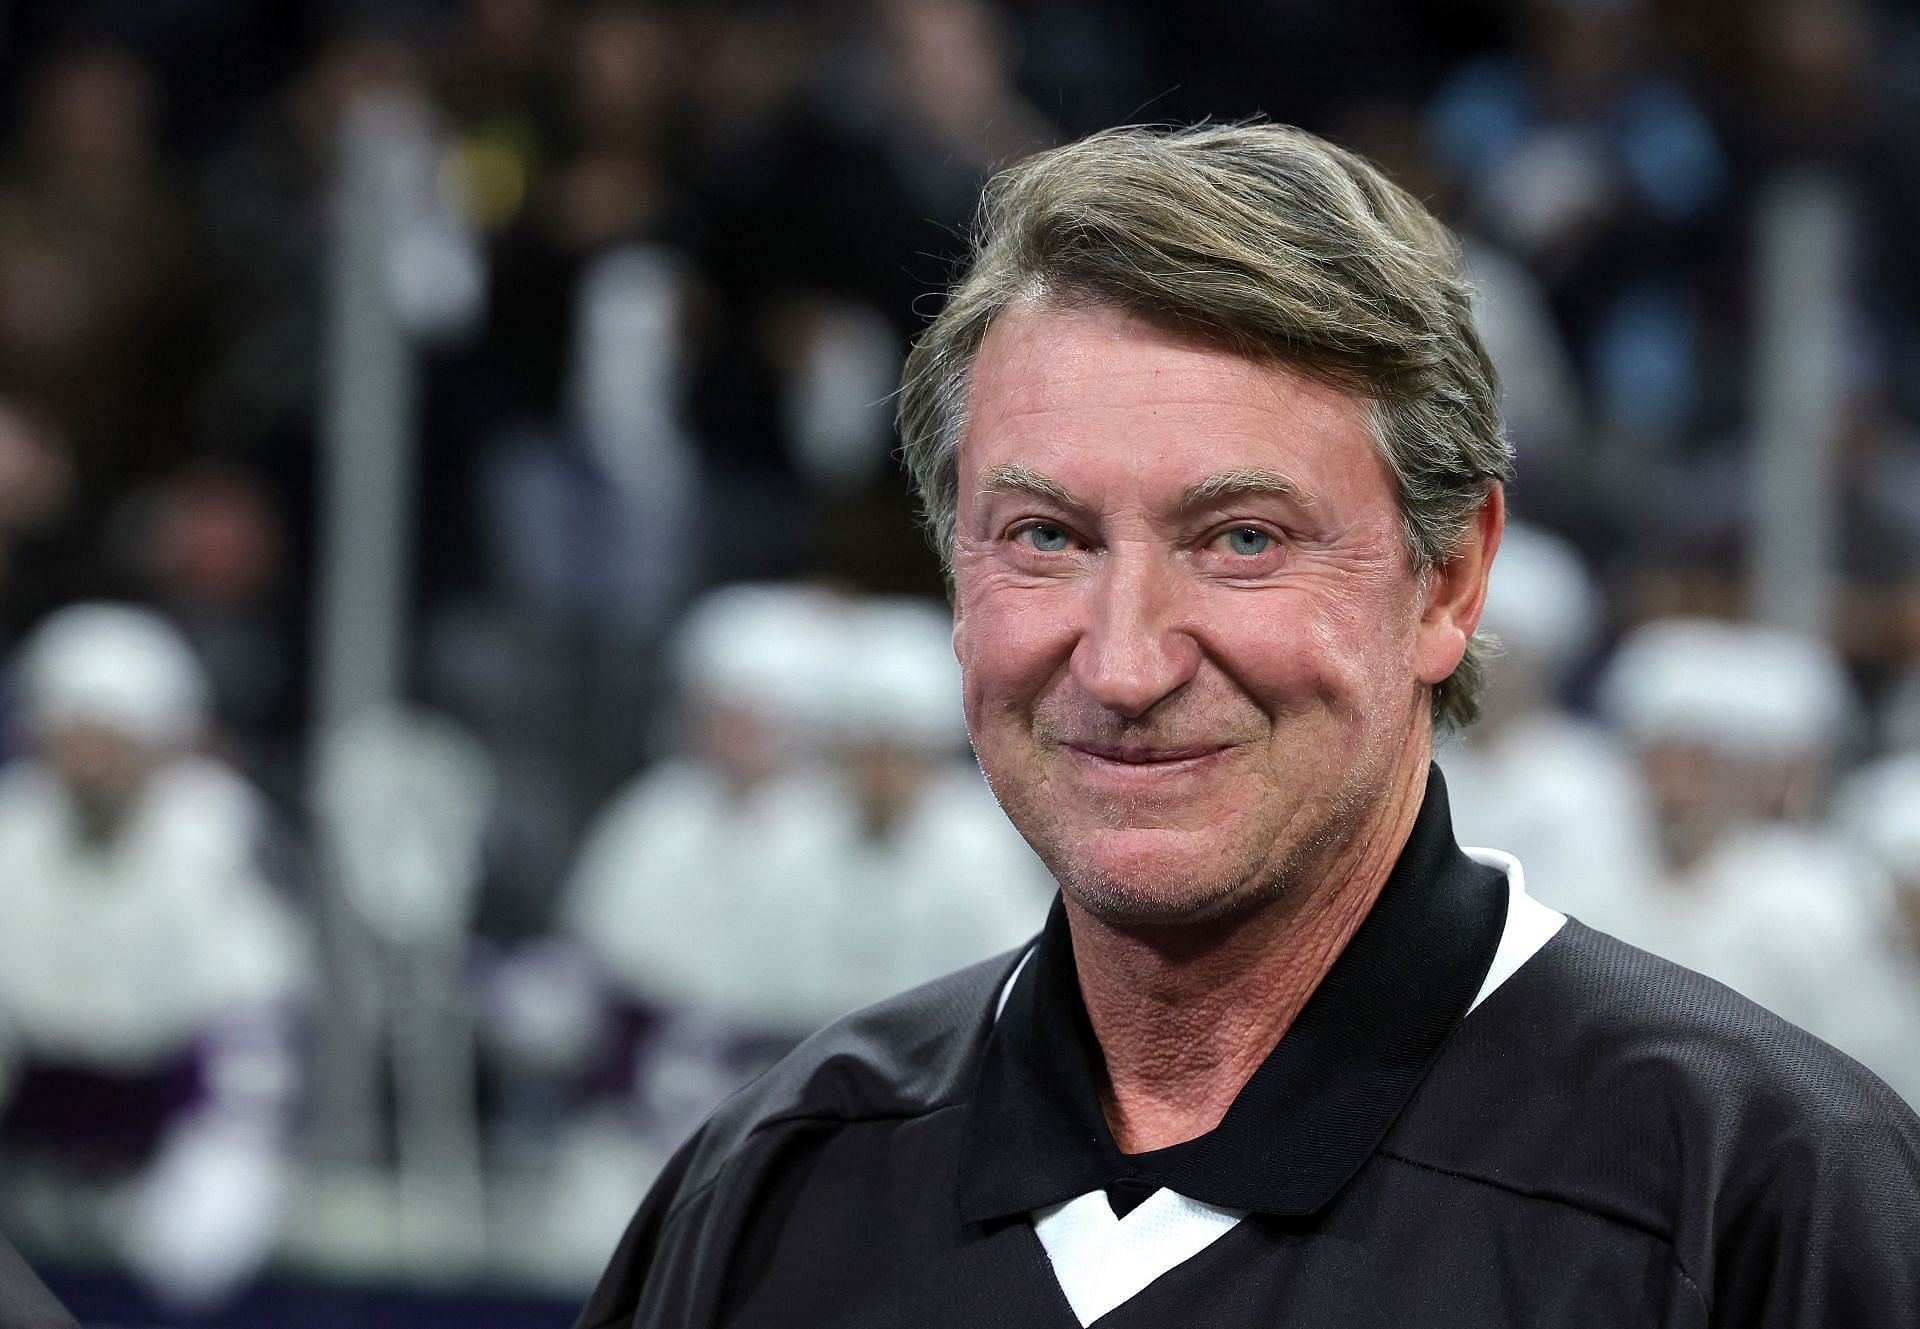 Wayne Gretzky, Biography, Stats, Facts, & Stanley Cups